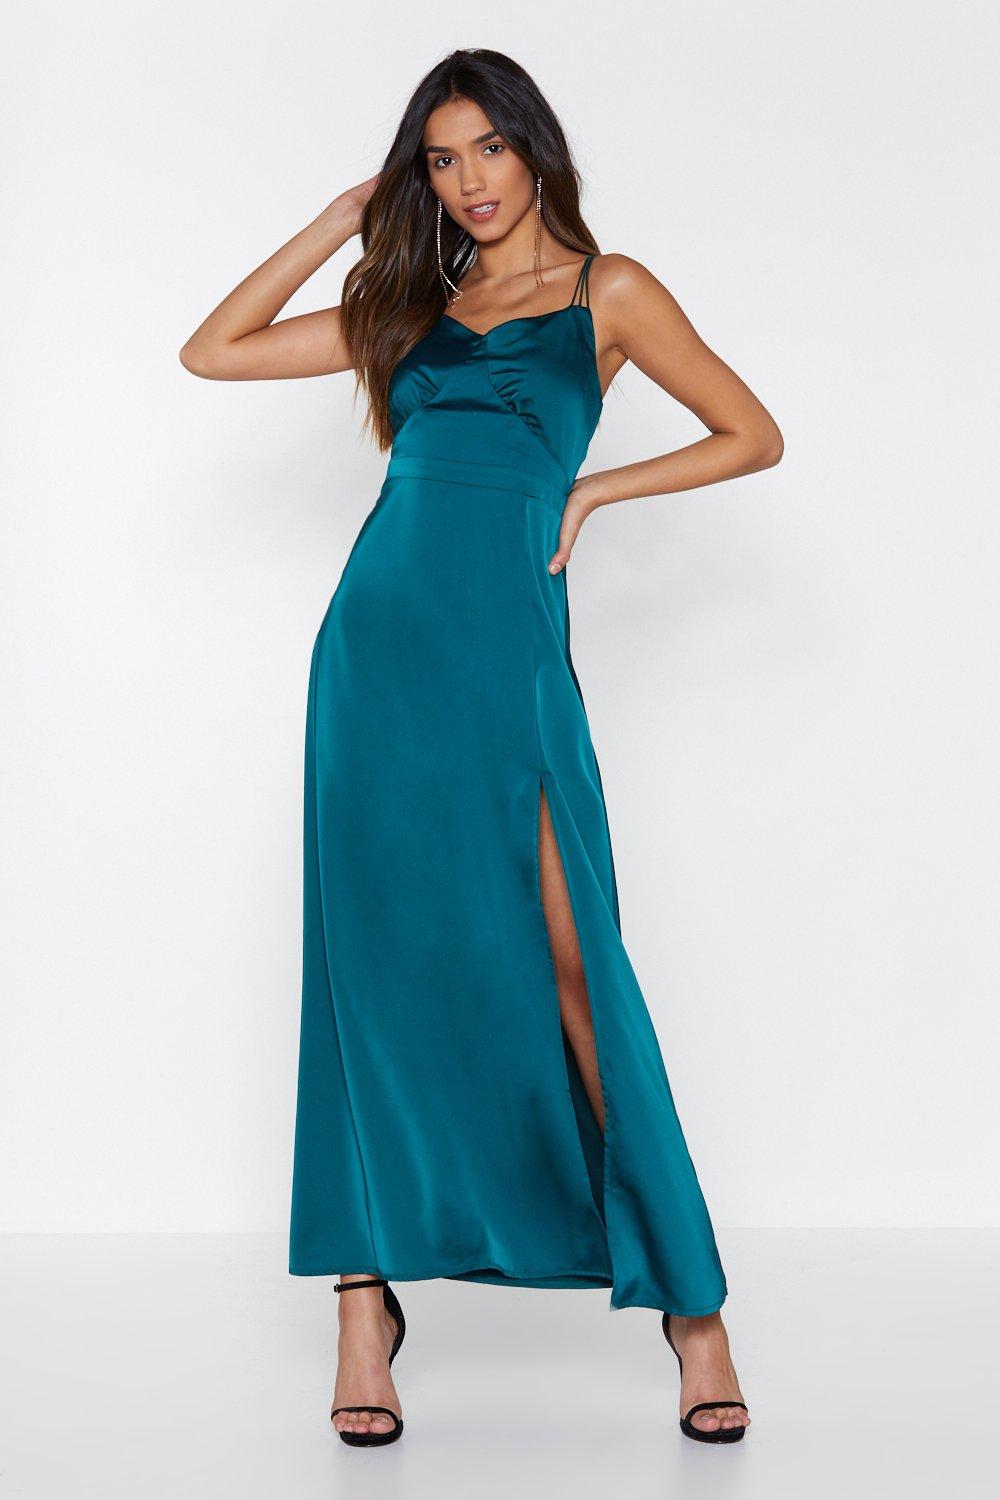 teal satin gown